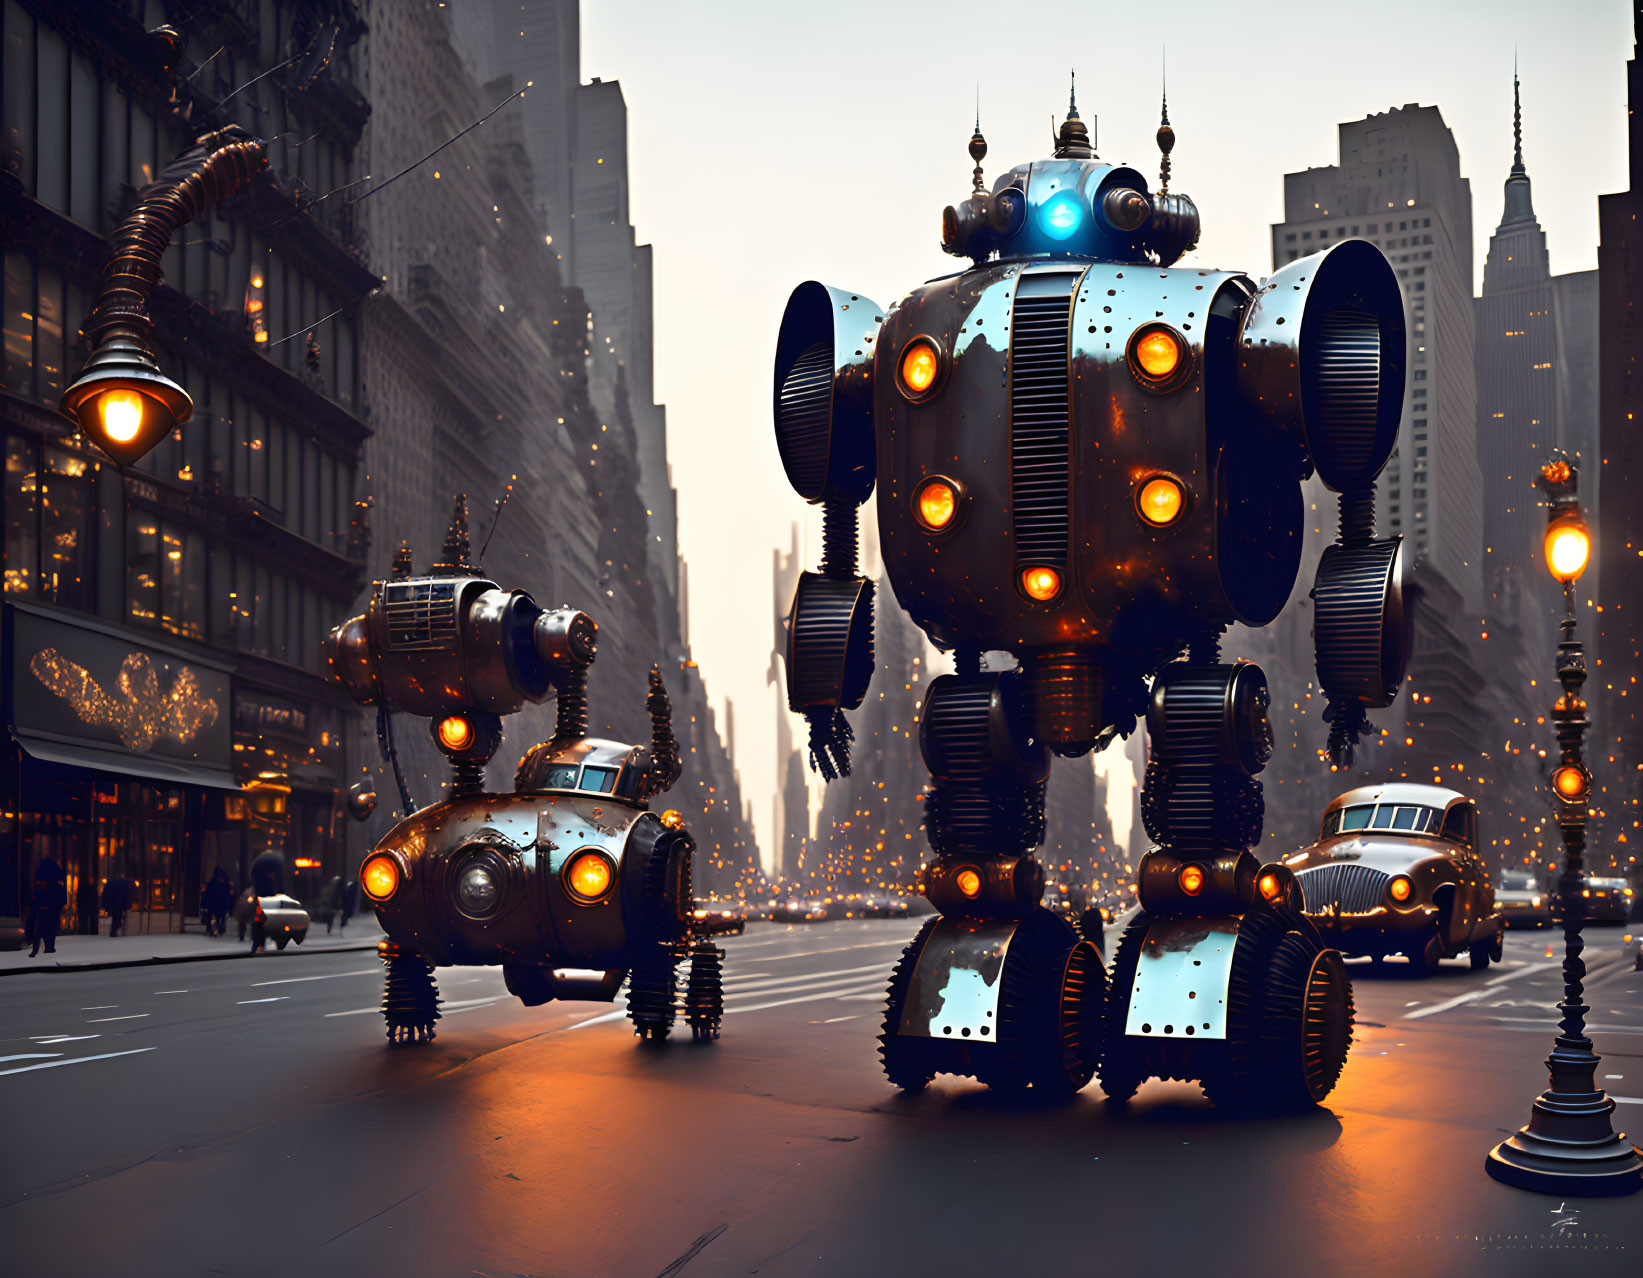 Two large retro-futuristic robots with glowing lights in a city street scene.